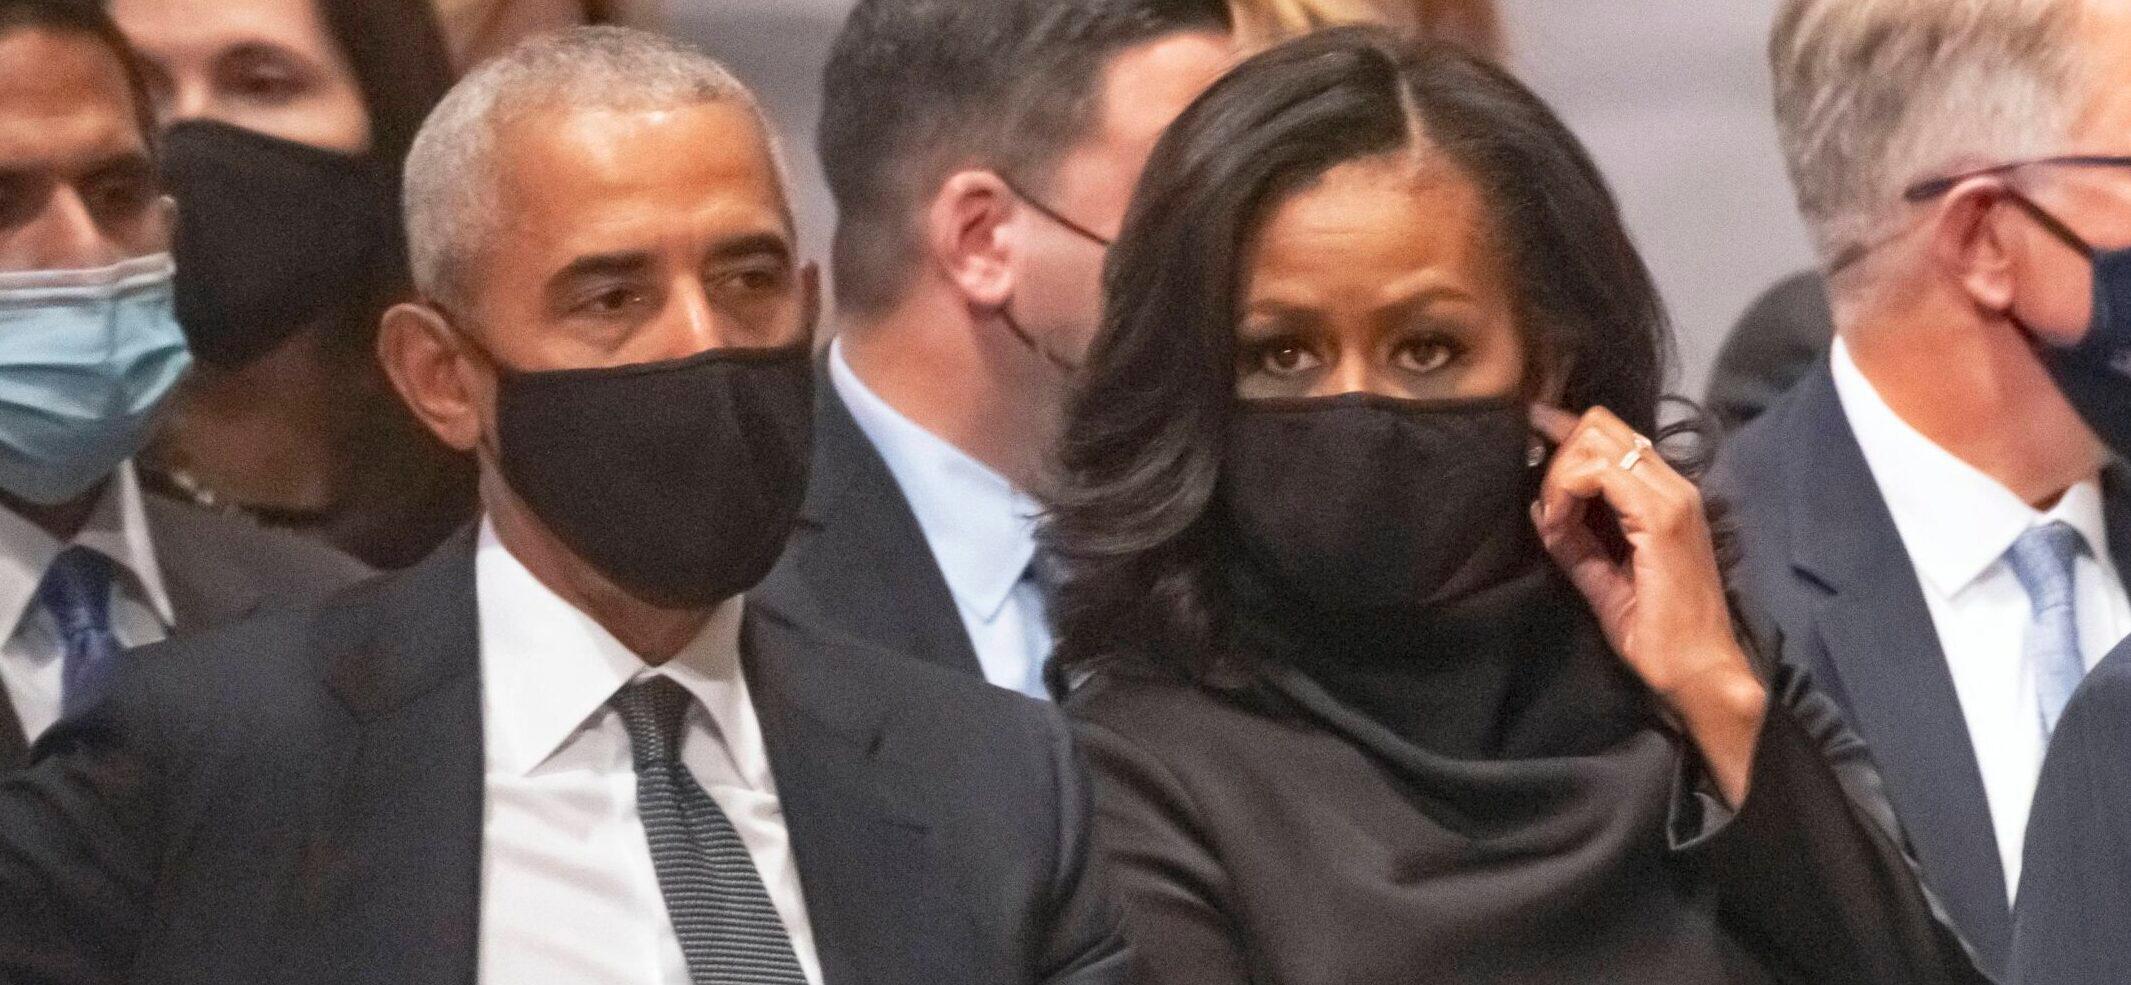 former US President Barack Obama and former first lady Michelle Obama attend the funeral of former US Secretary of State Colin L. Powell at the Washington National Cathedral in Washington, DC